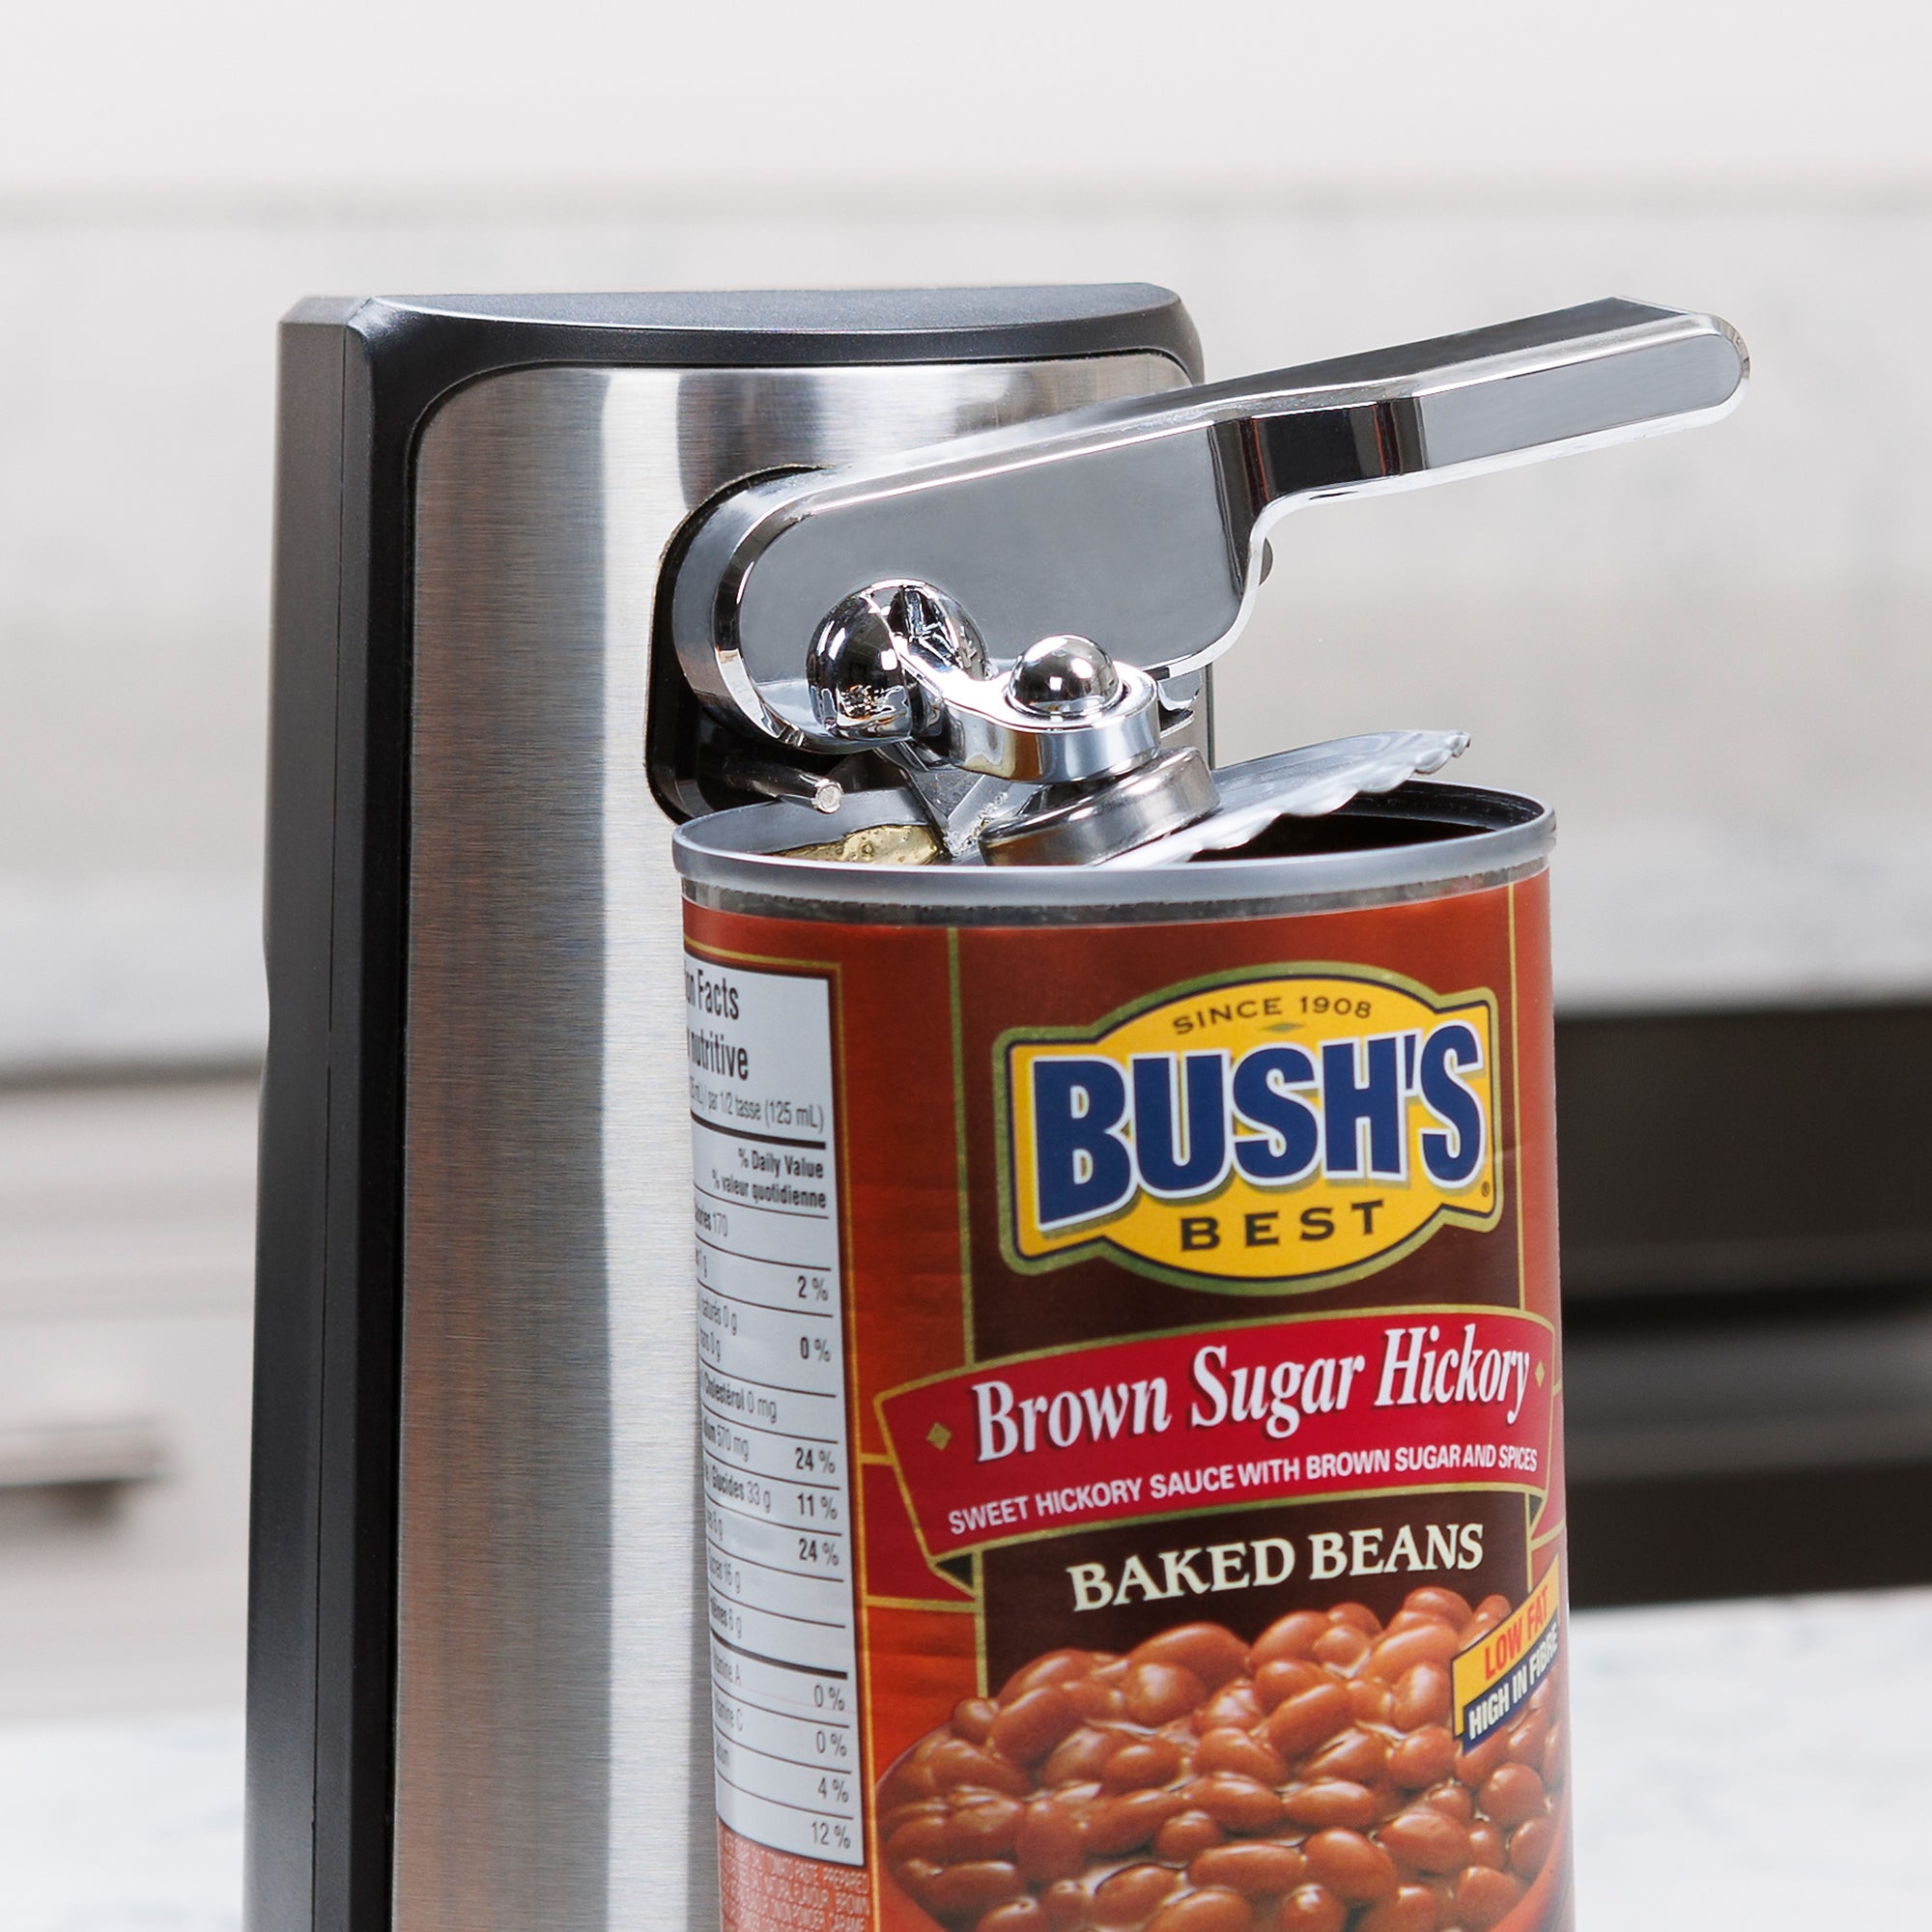 Closeup view of the Kenmore 3-in-1 stainless steel can opener opening a can of baked beans